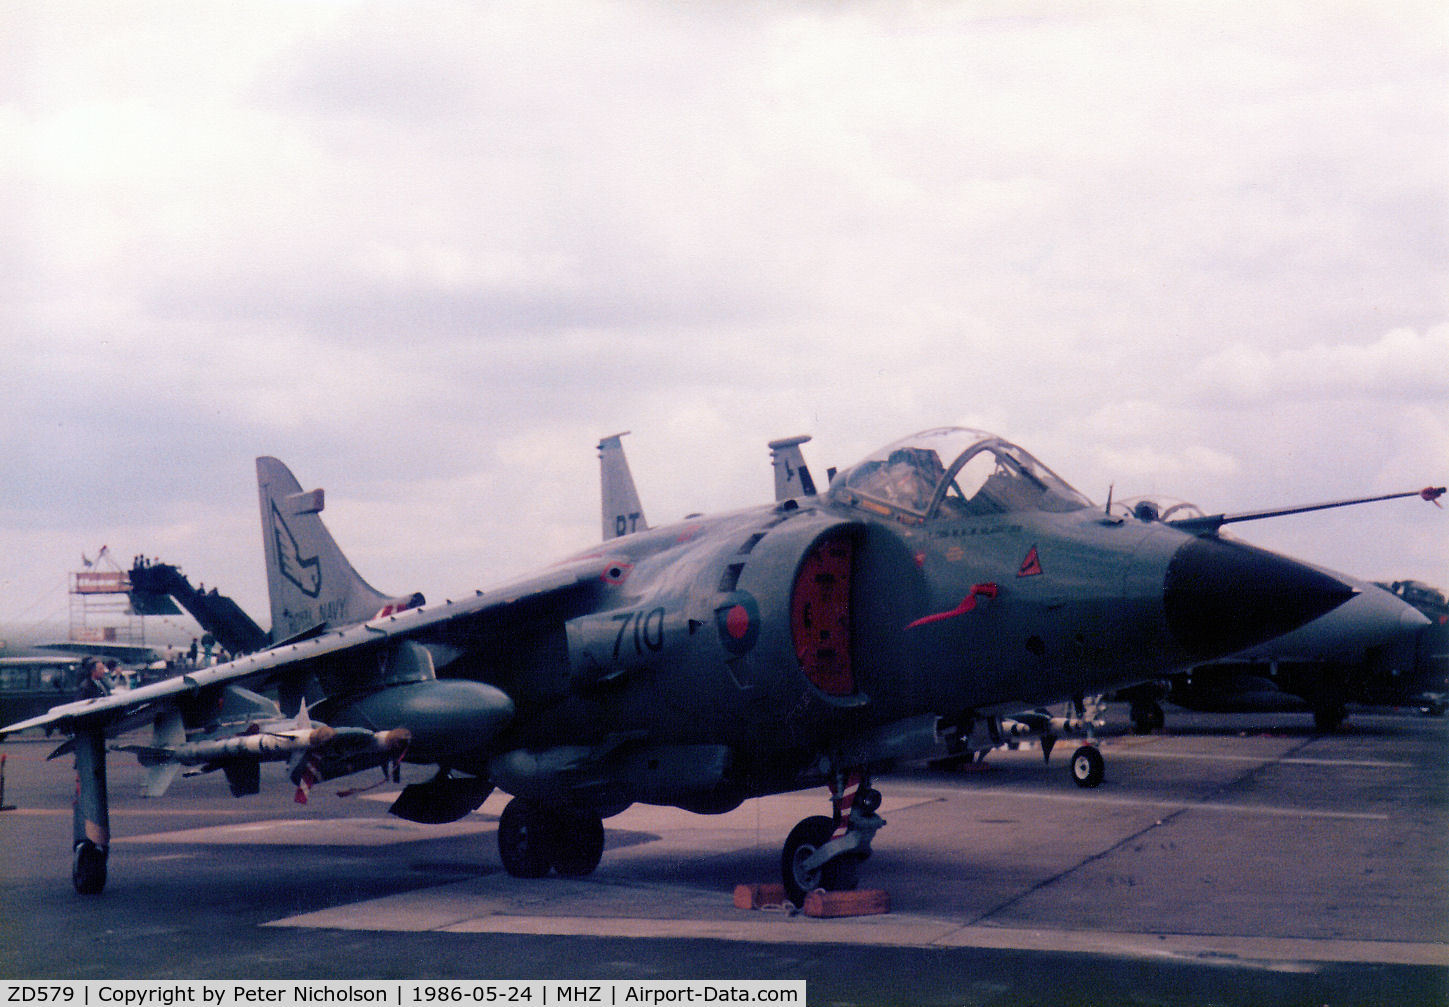 ZD579, 1985 British Aerospace Sea Harrier FRS.1 C/N 41H-912042/B36/P14, Sea Harrier FRS.1 of 899 Squadron based at RNAS Yeovilton on display at the 1986 RAF Mildenhall Air Fete.